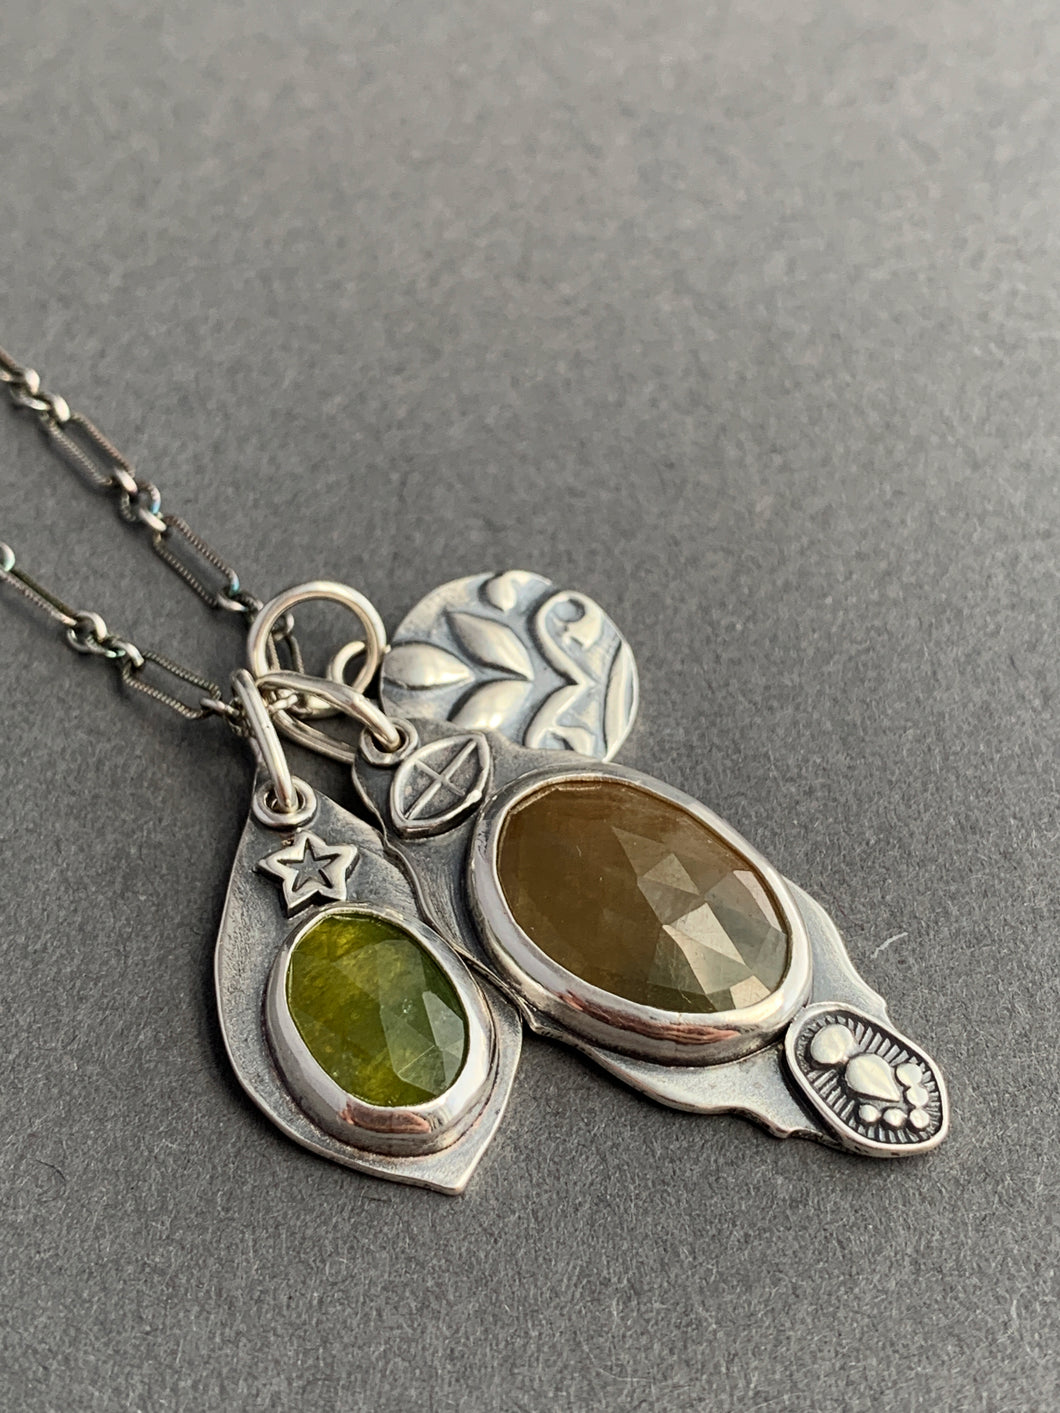 Sapphire and vesuvianite charms with a leaf “coin” accent charm